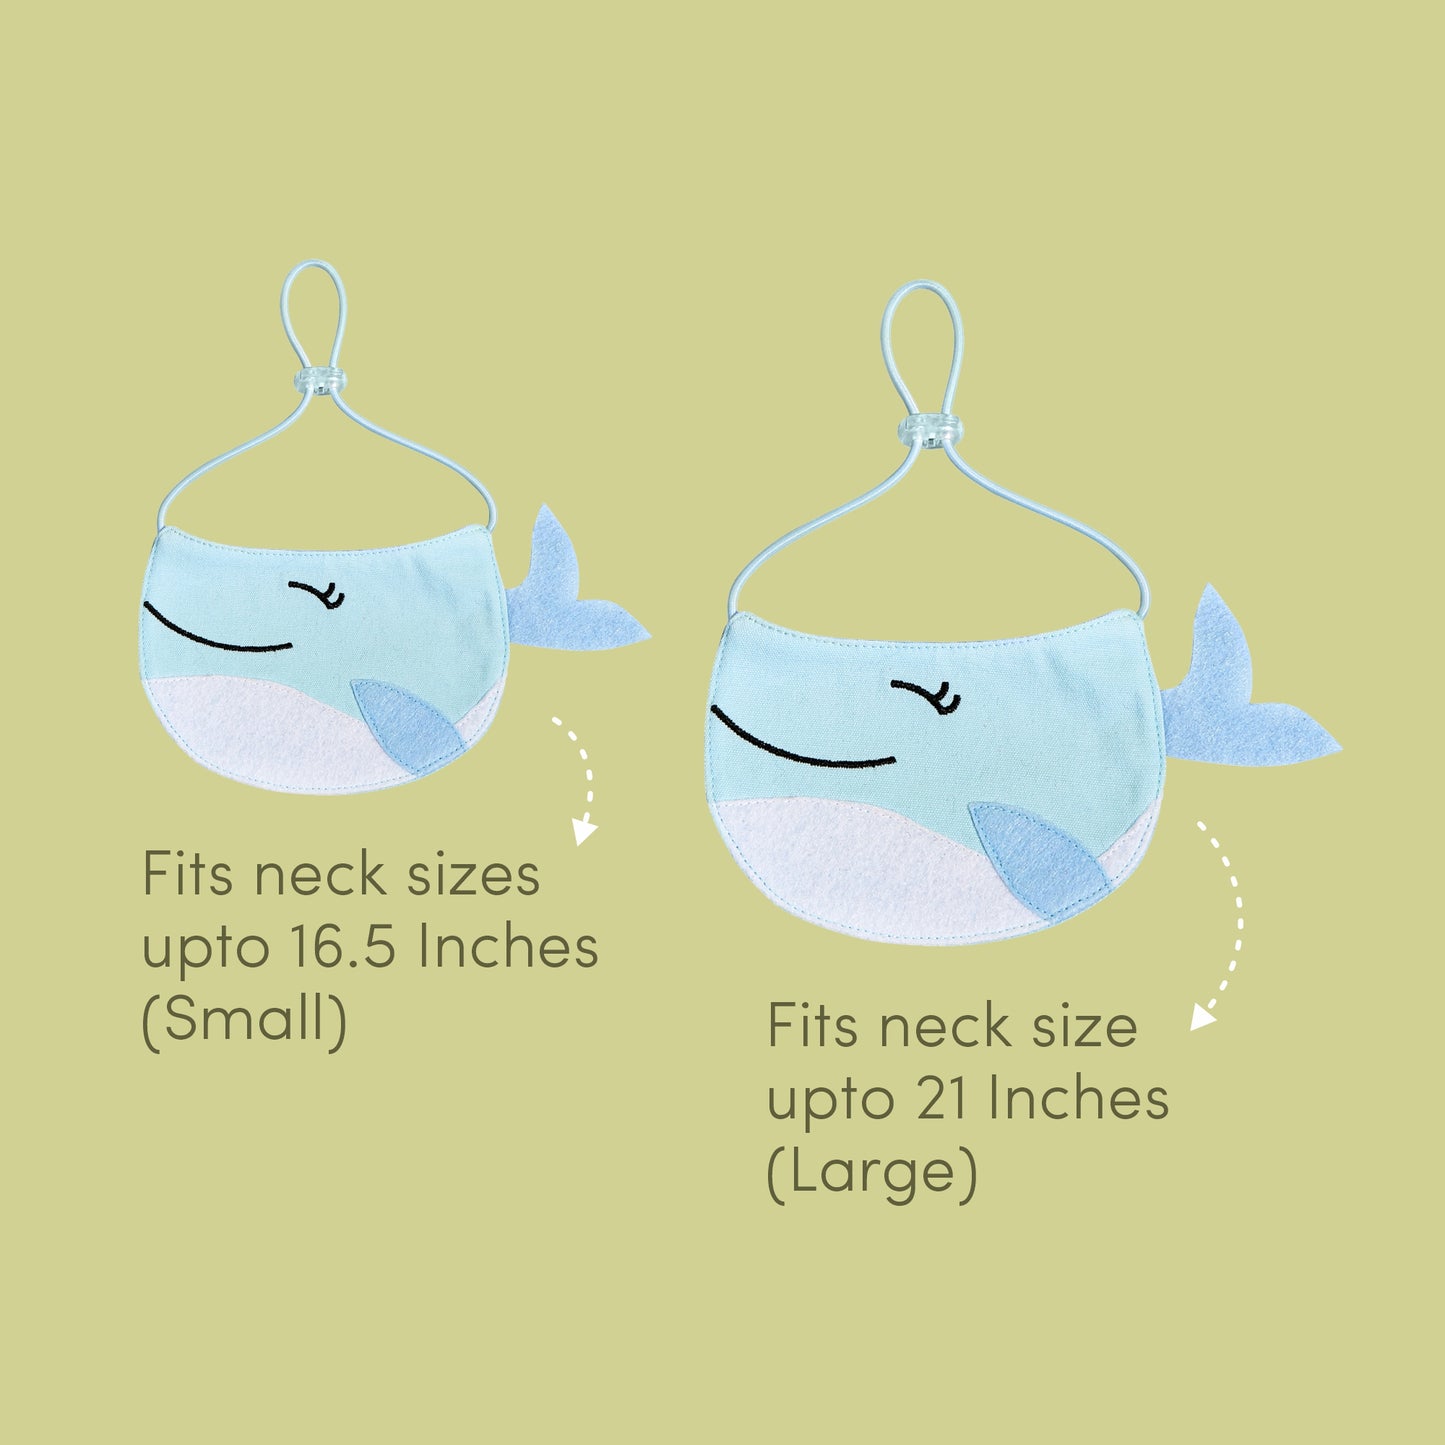 Fofos - Cute Pet Bib Whale Durable Pet Accessory For Dogs & Cats